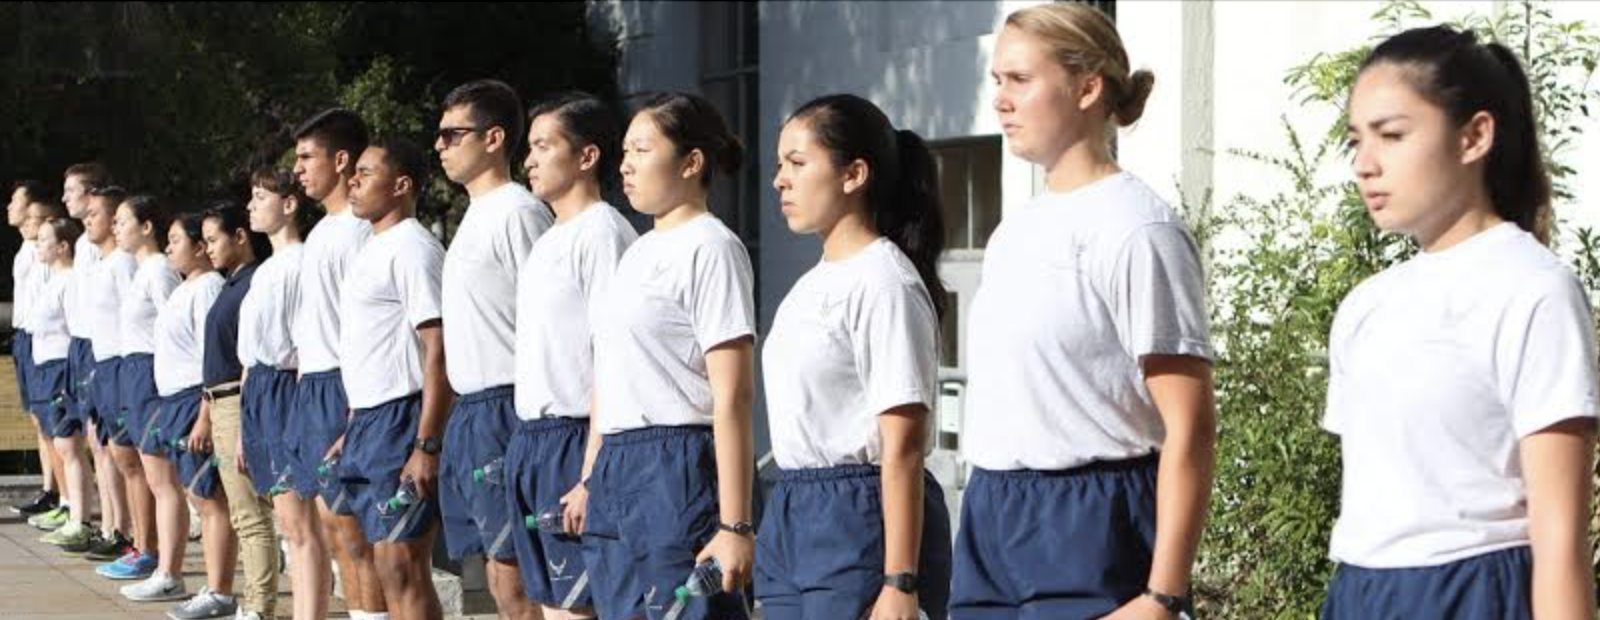 cadets in attention for physical training